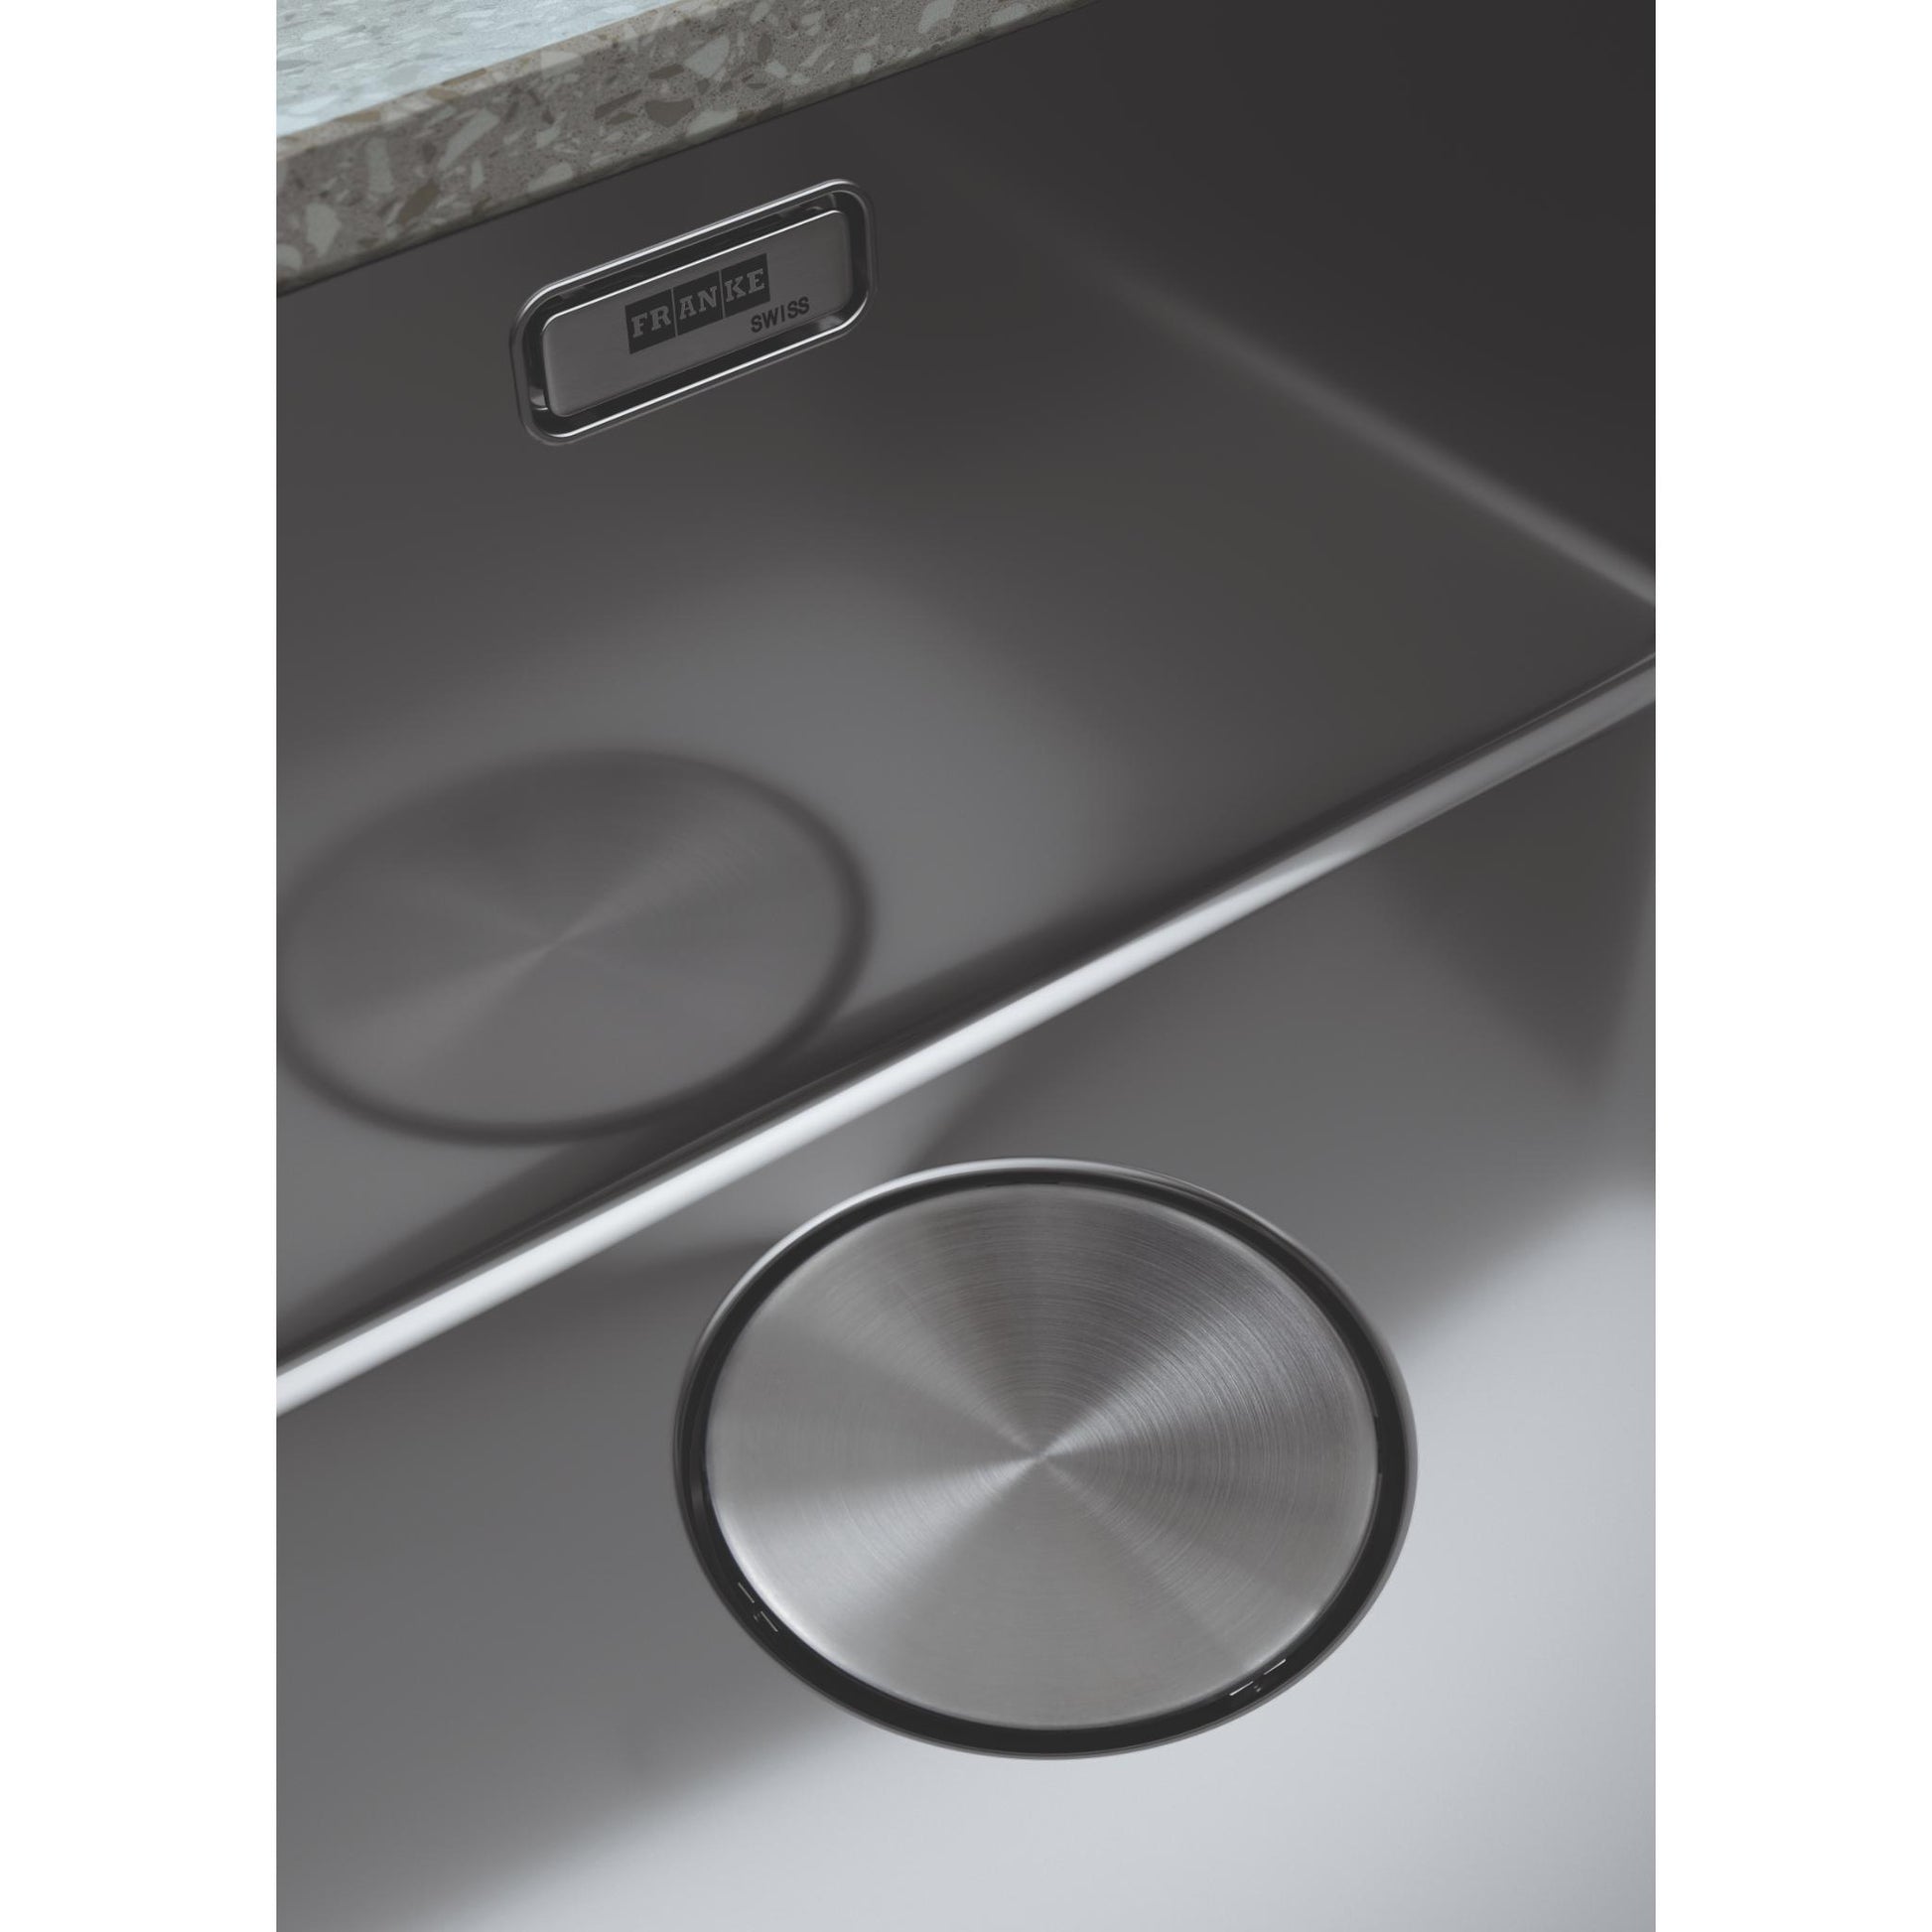 Franke Mythos Undermount  Stainless Steel Sink close up view of finish and plug